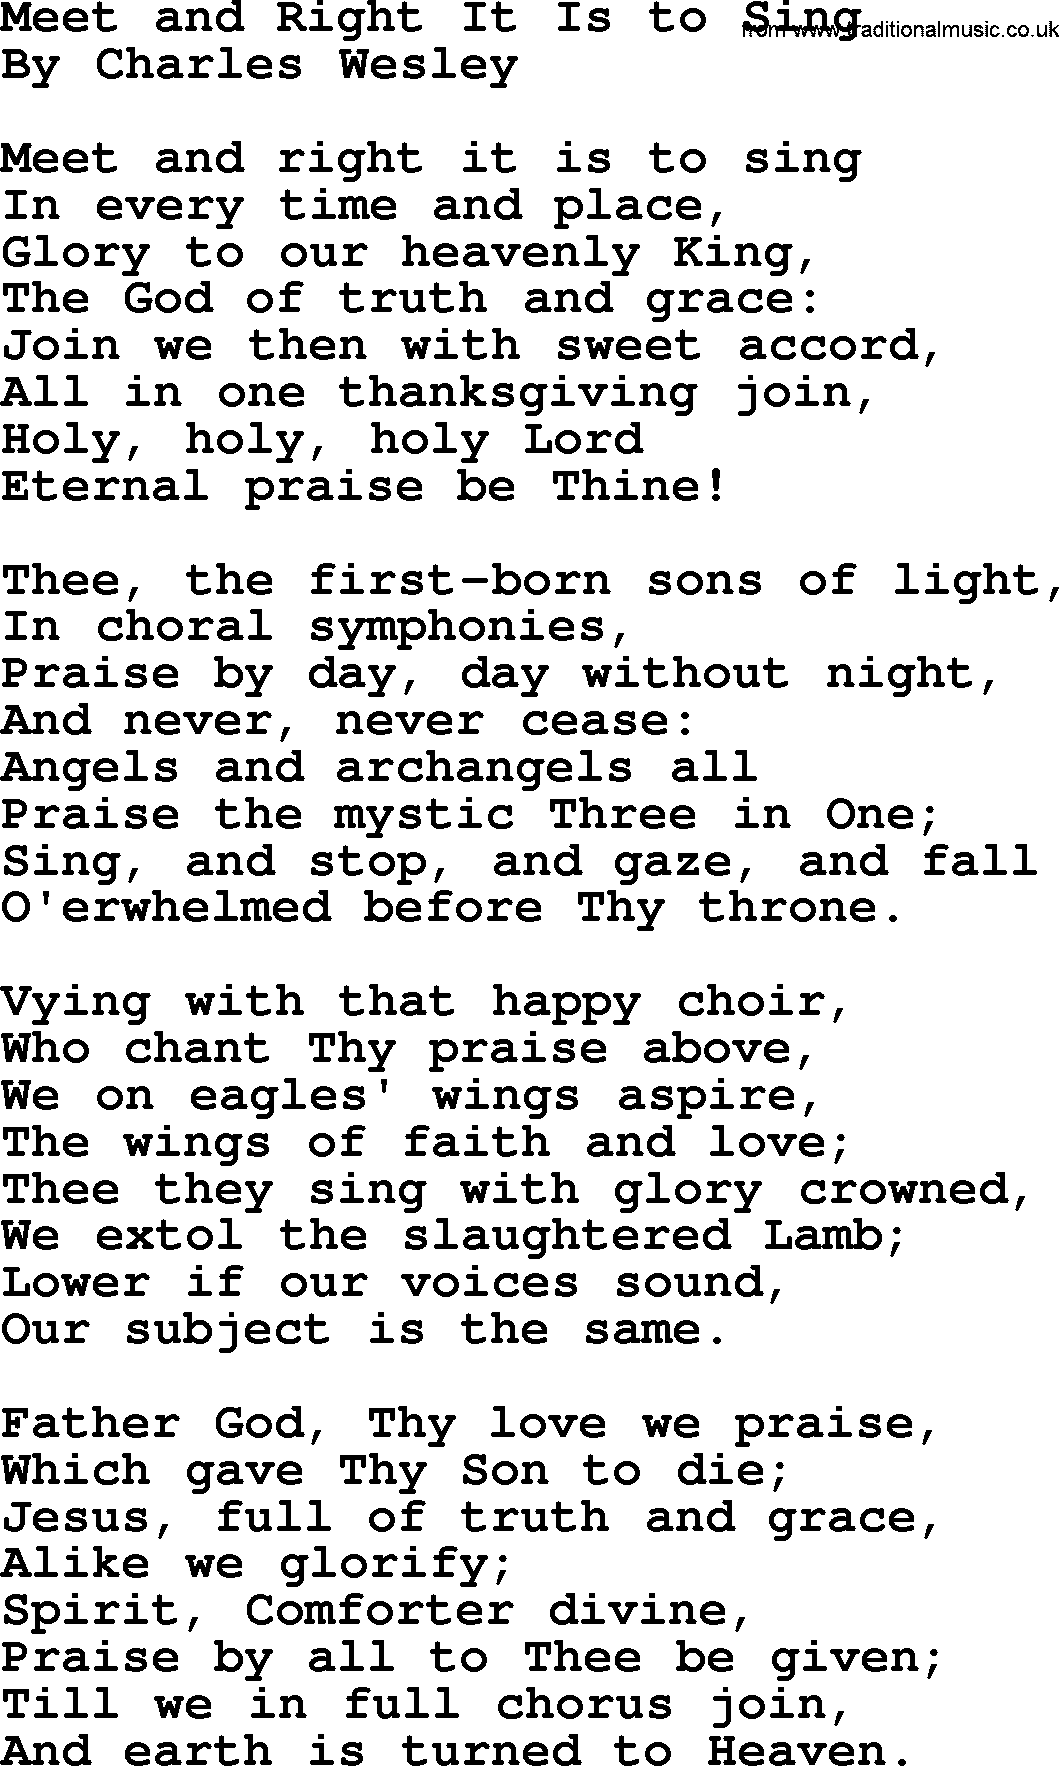 Charles Wesley hymn: Meet and Right It Is to Sing, lyrics